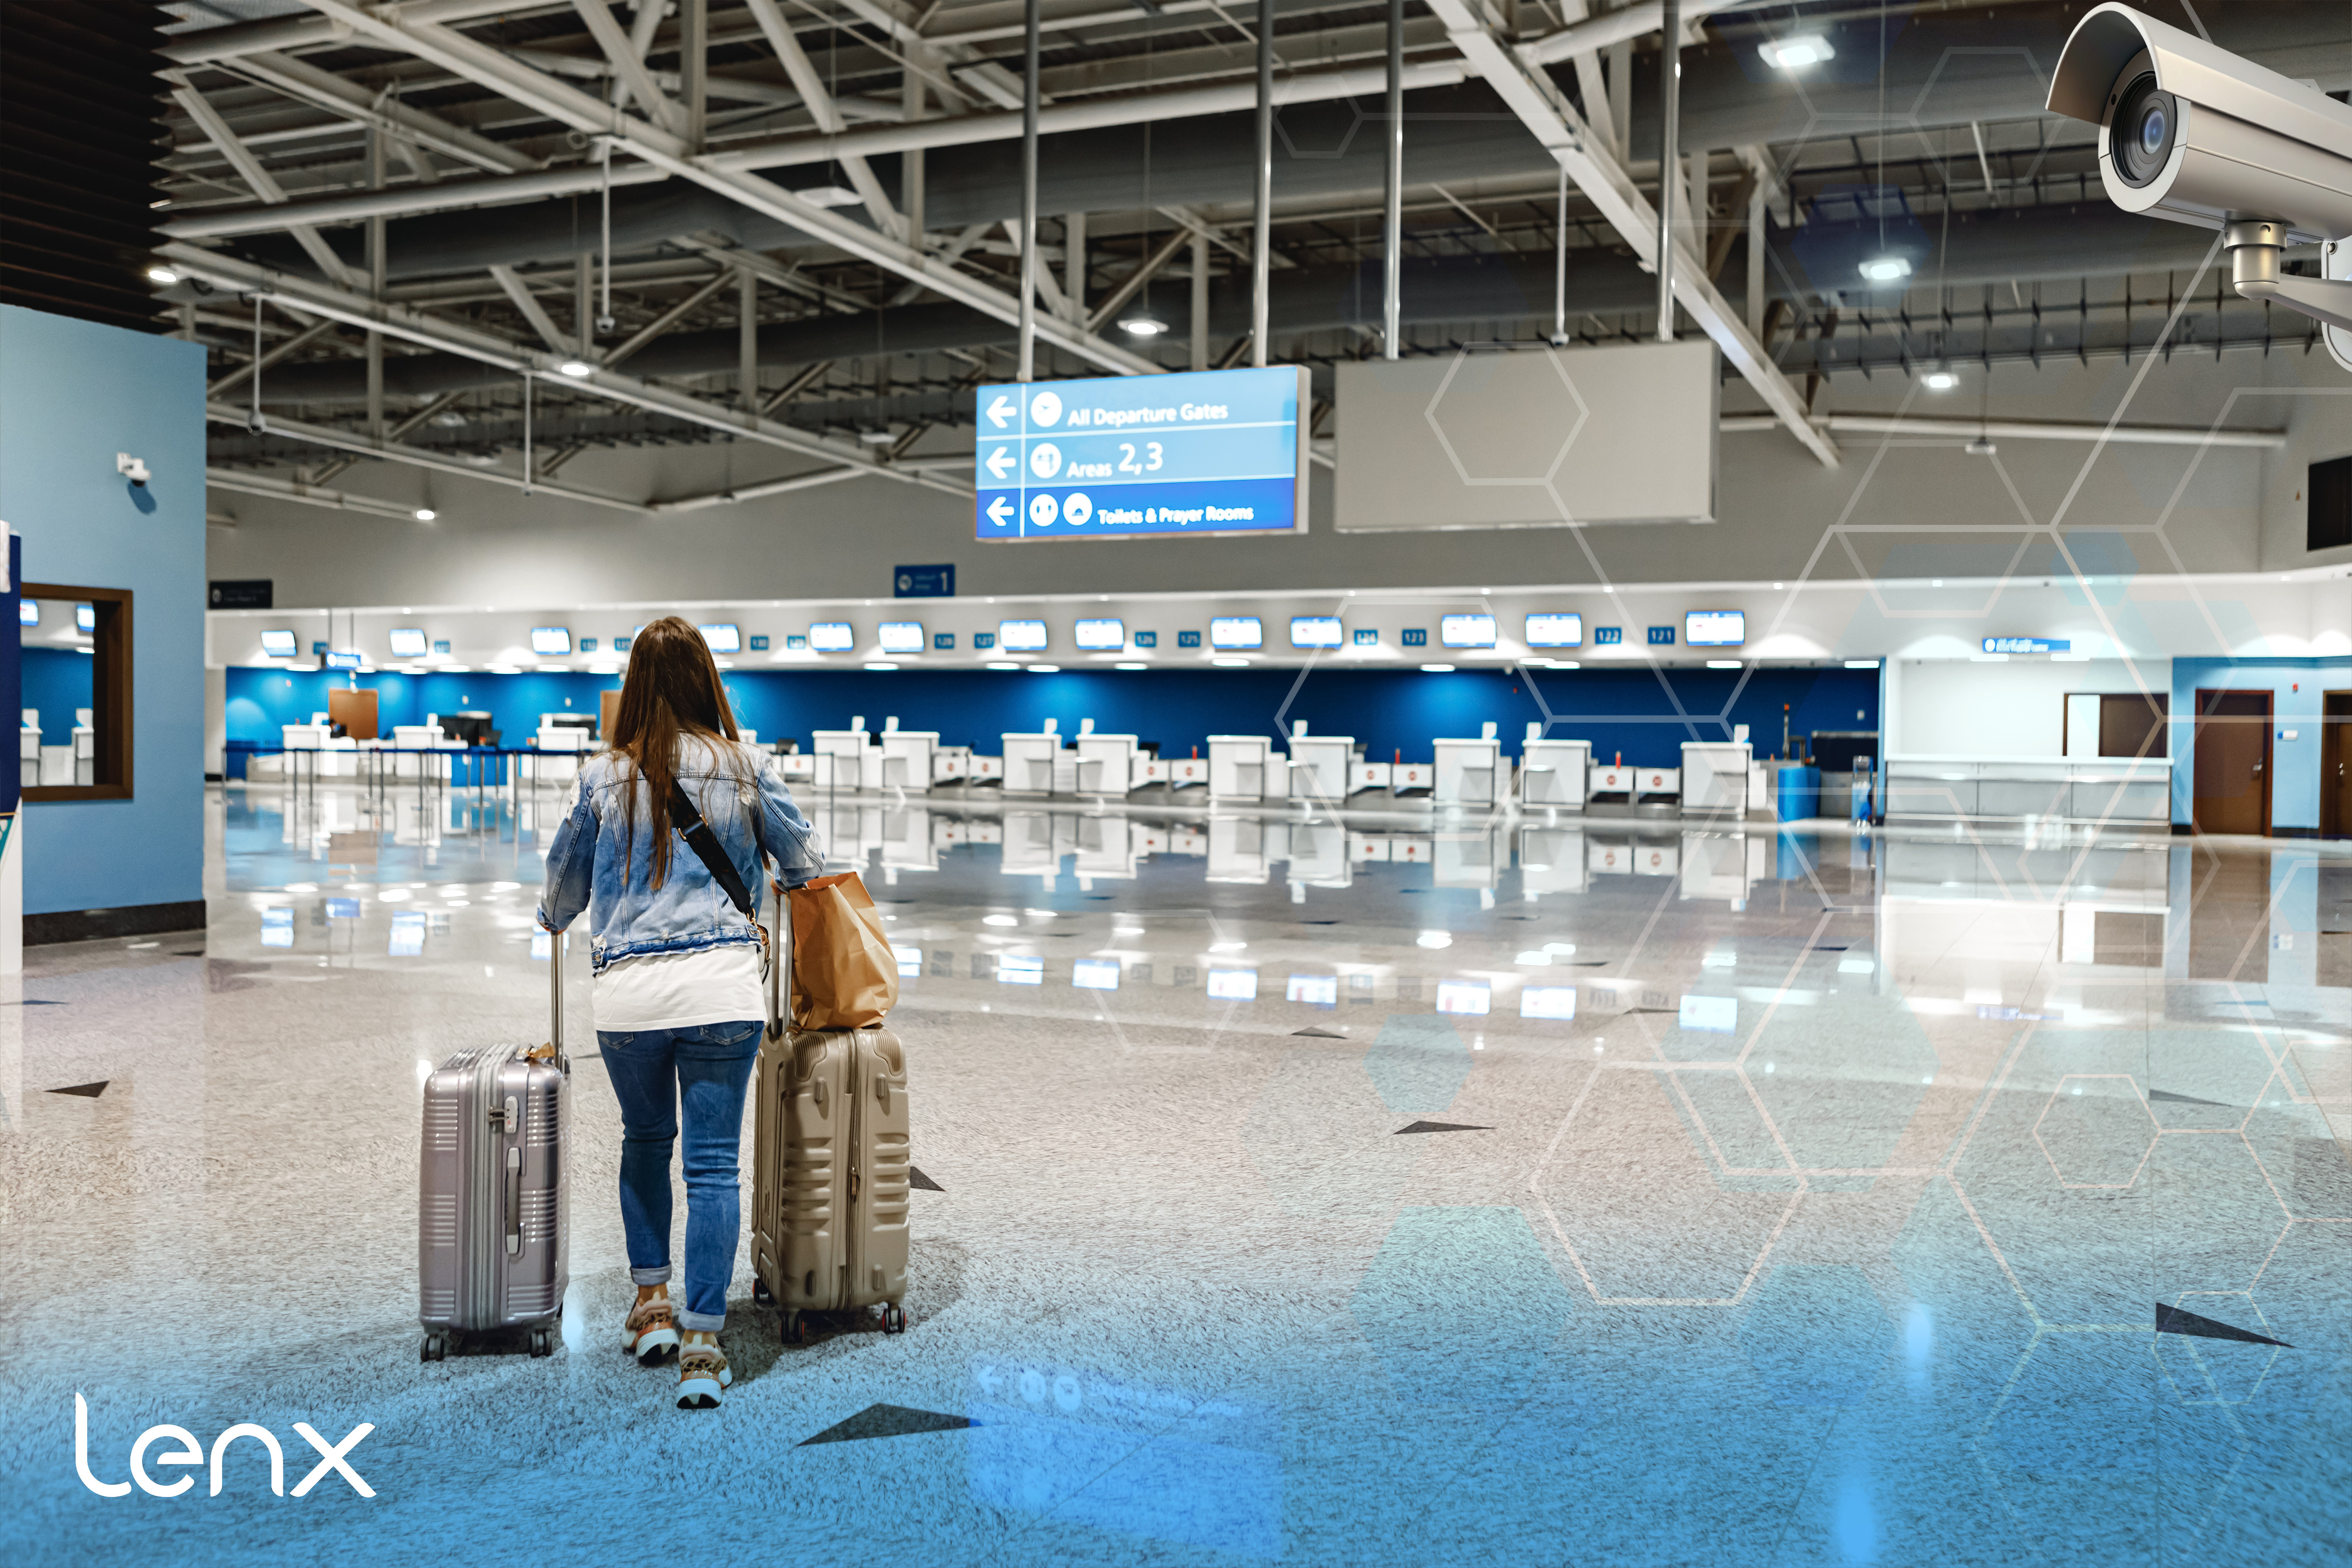 Combining Airport Security With Gun Detection And AI Security Systems